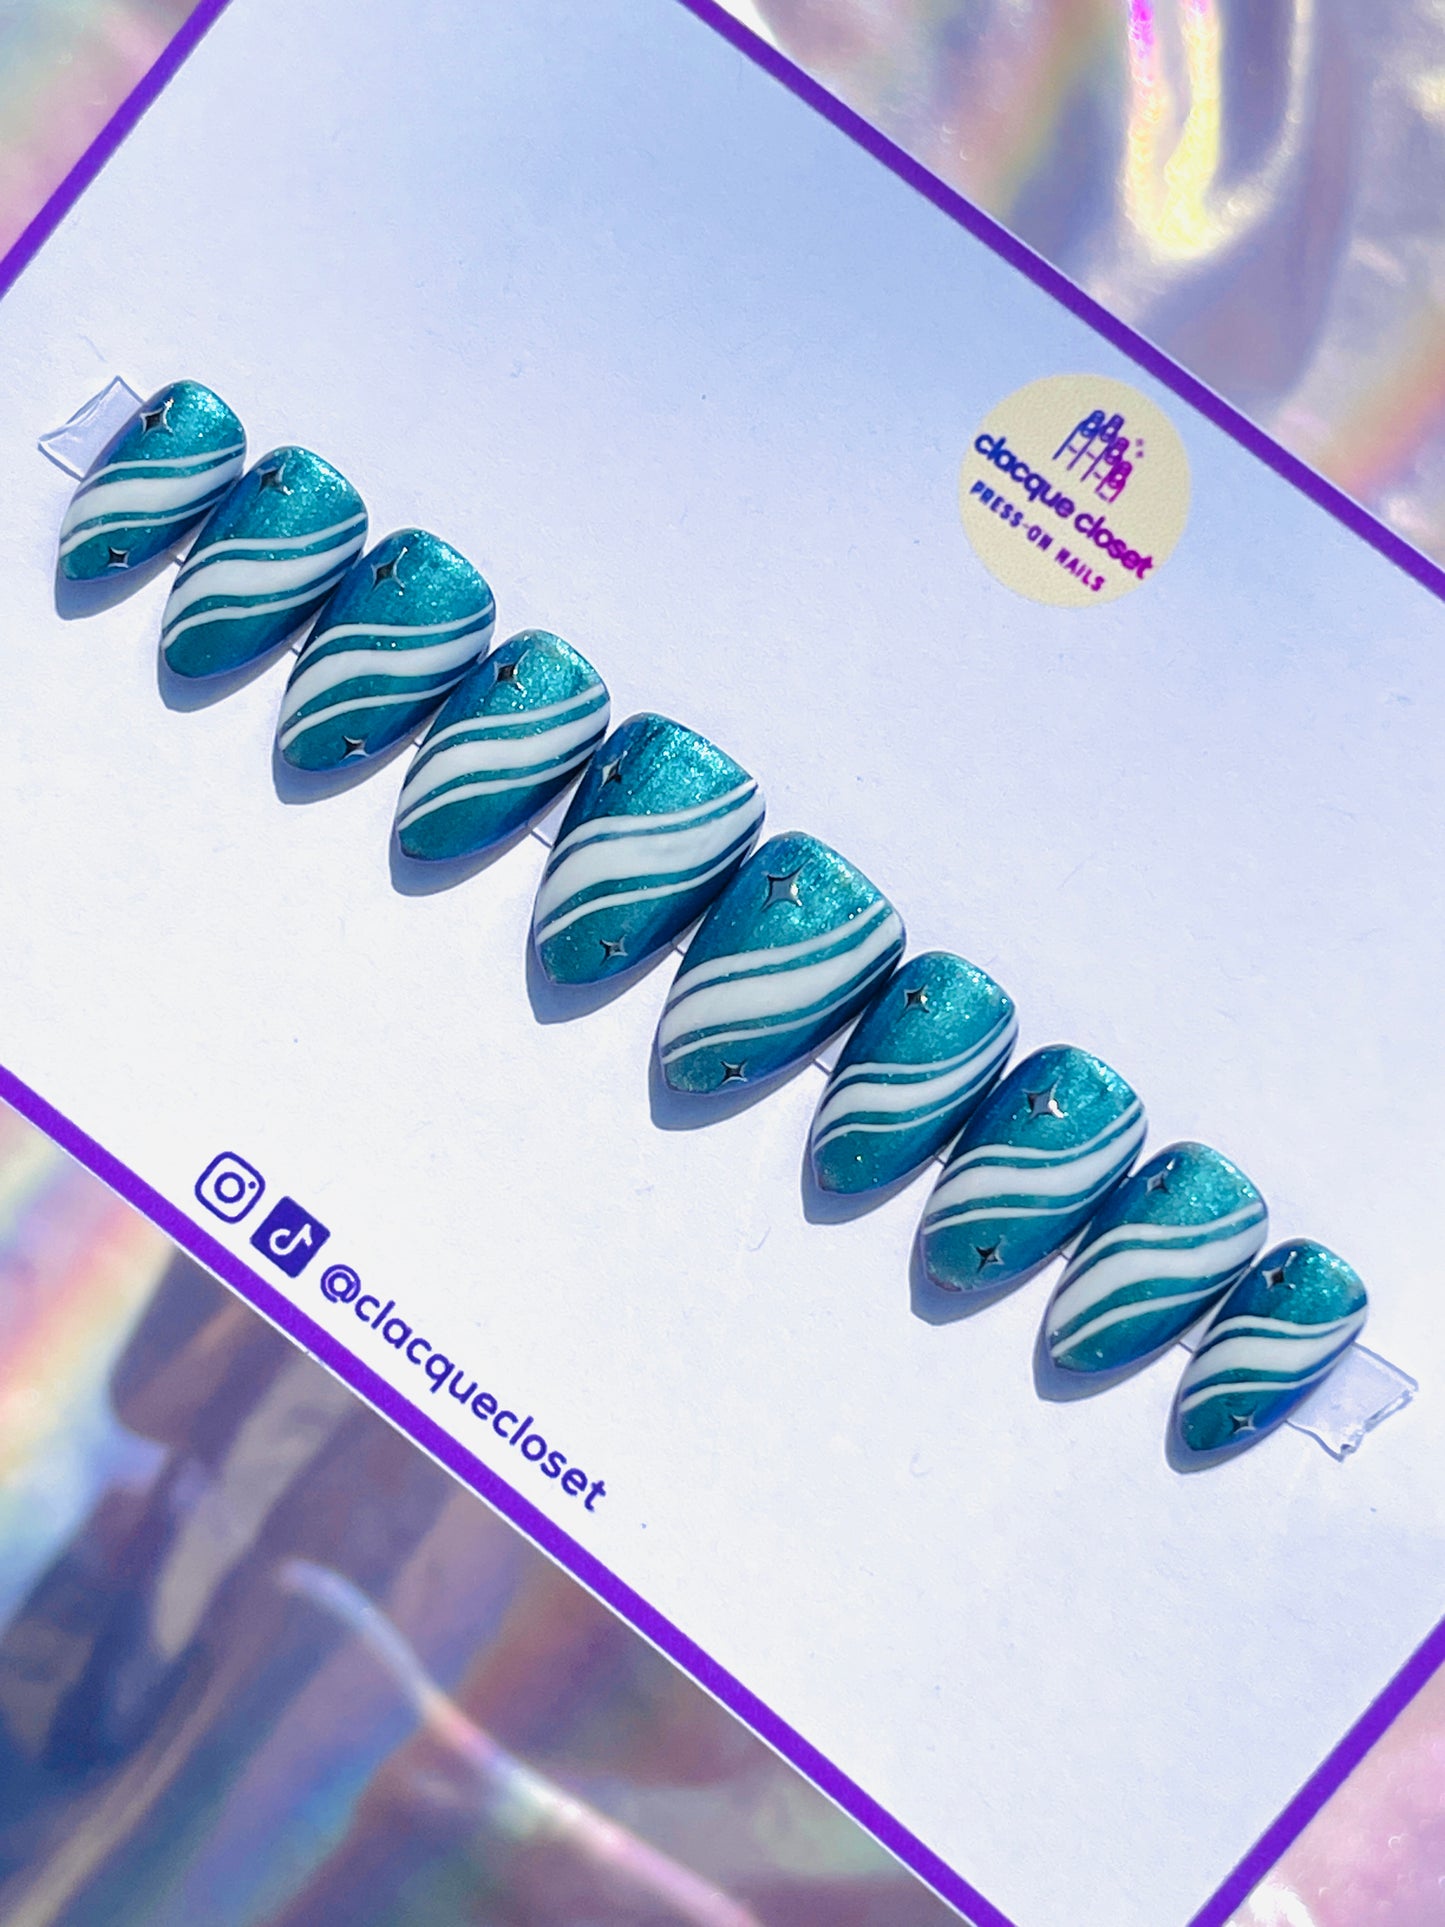 Medium-length almond-shaped nails in a sparkly blue color, detailed with white curvy lines and adorned with silver stars, creating a whimsical night sky effect.